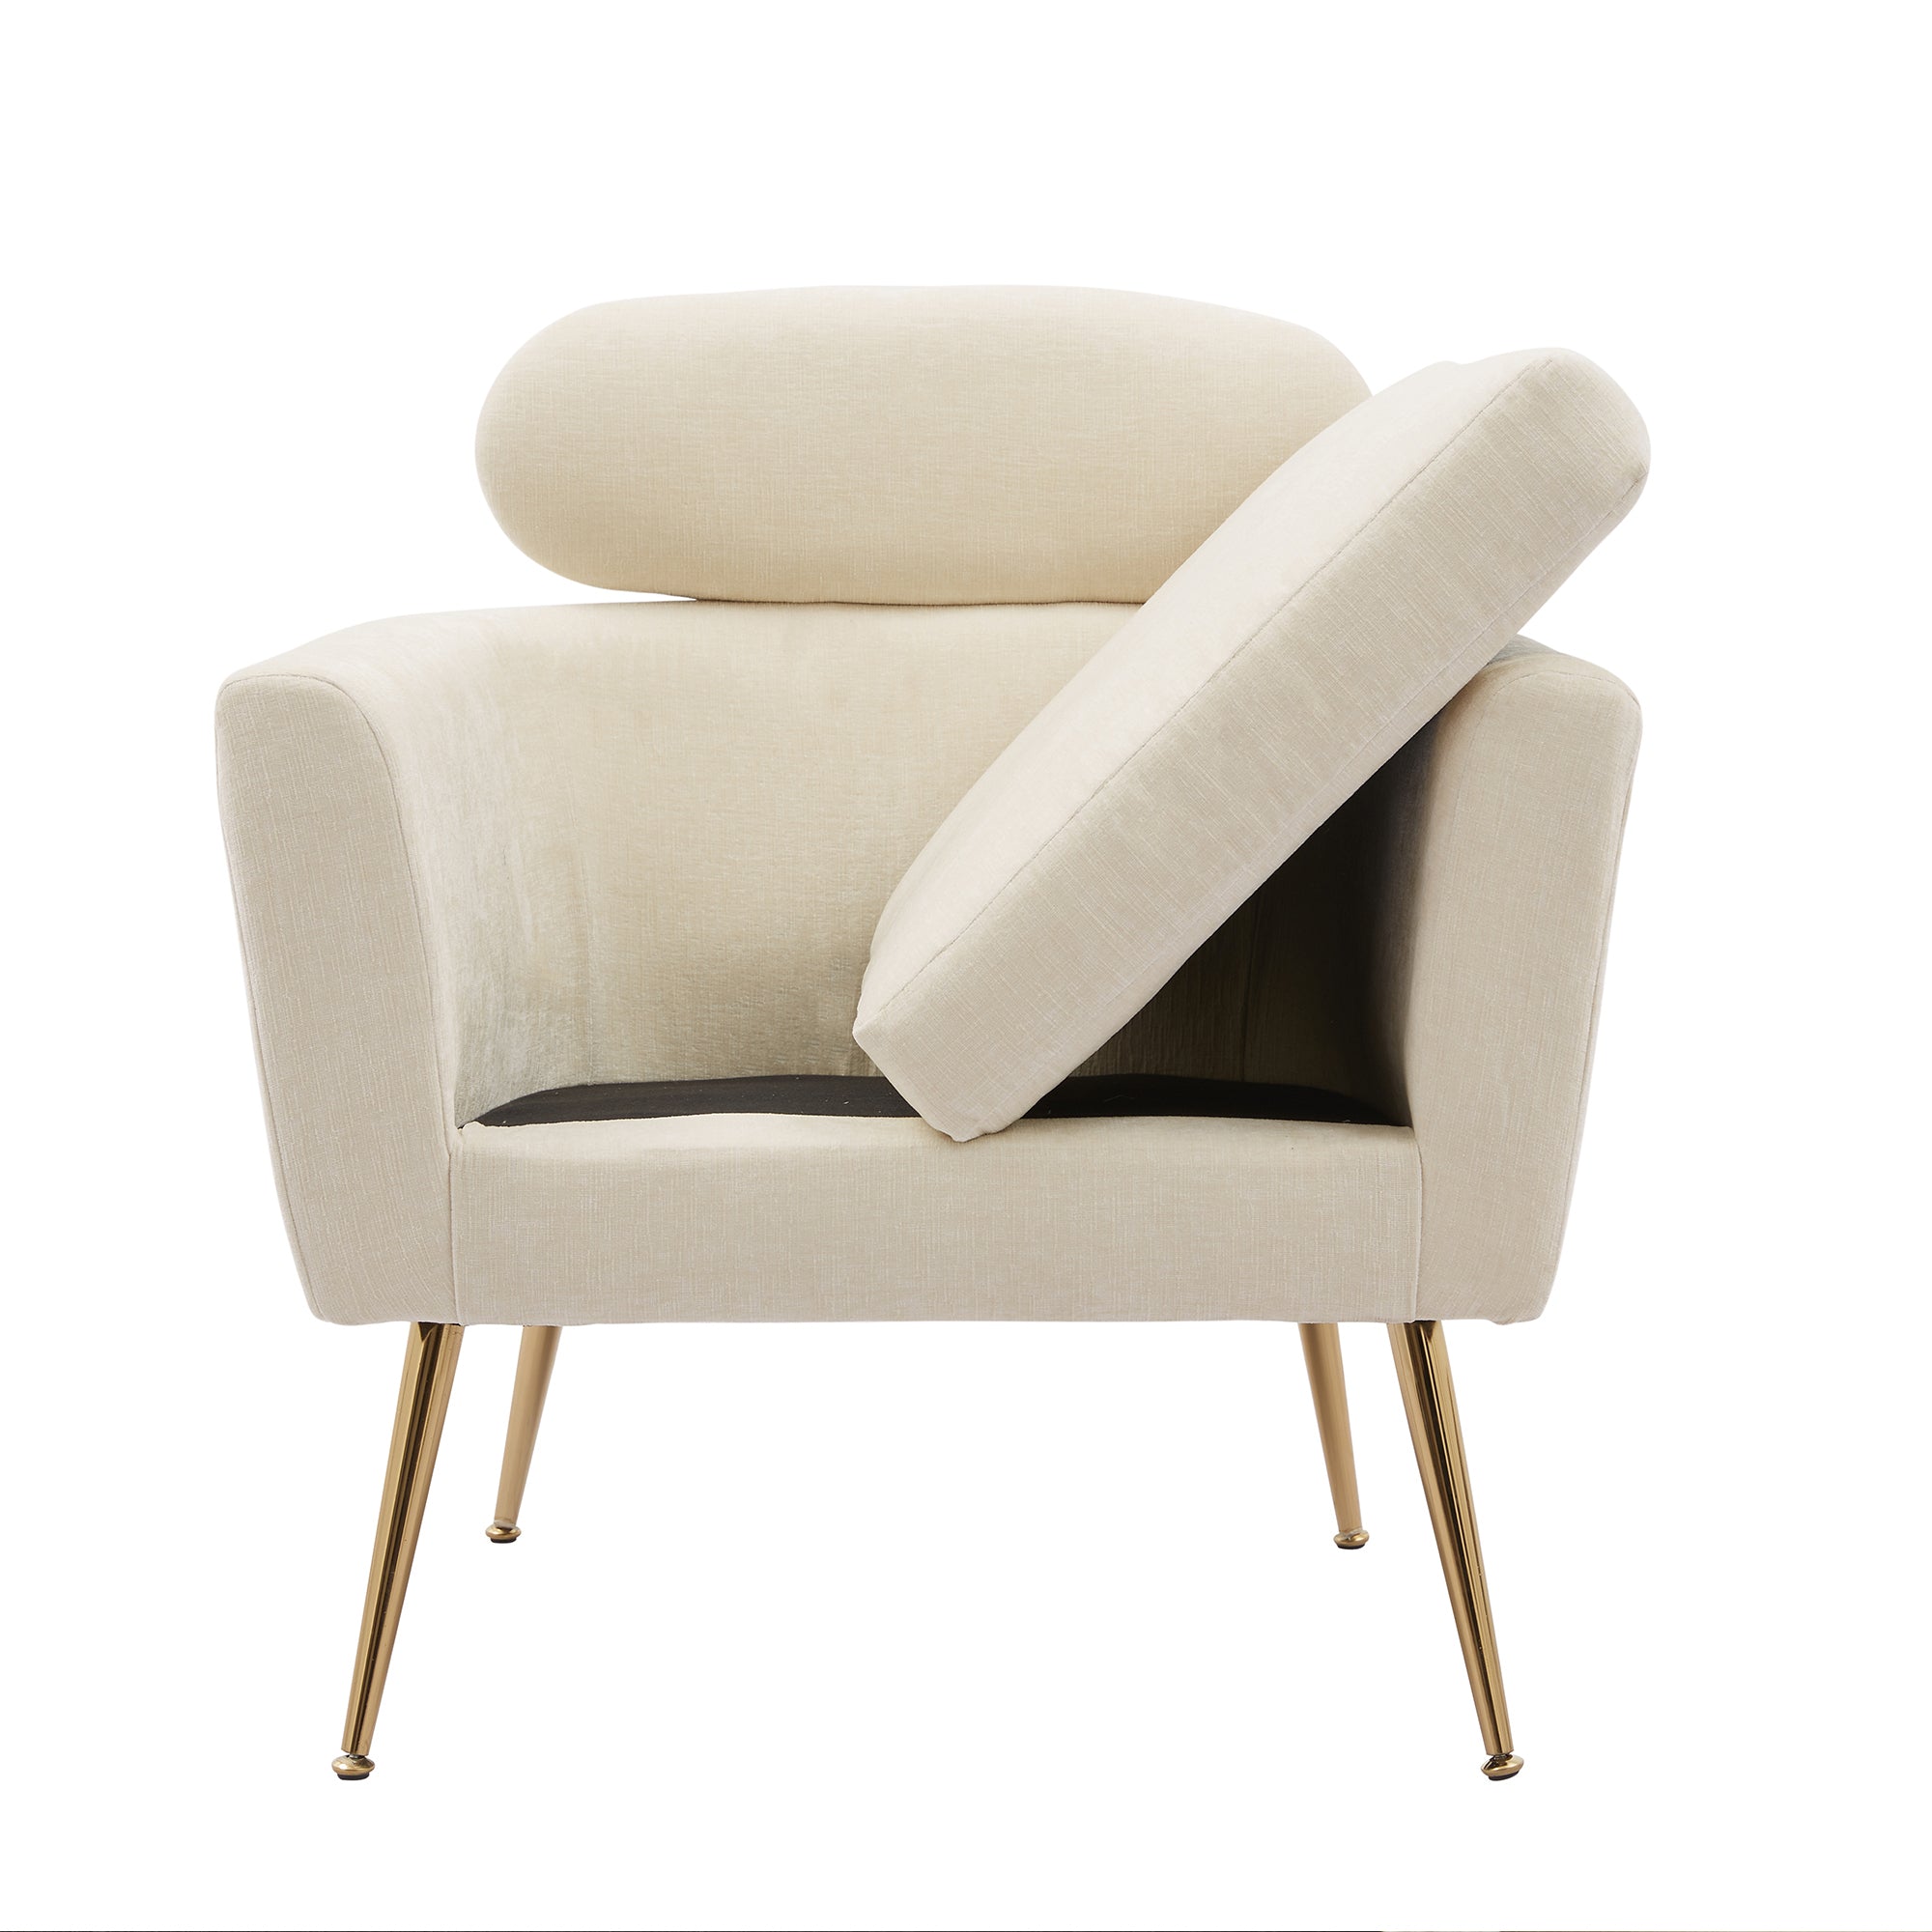 Single Sofa Leisure Club Chair with Gold Metal Leg and Throw Pillow 